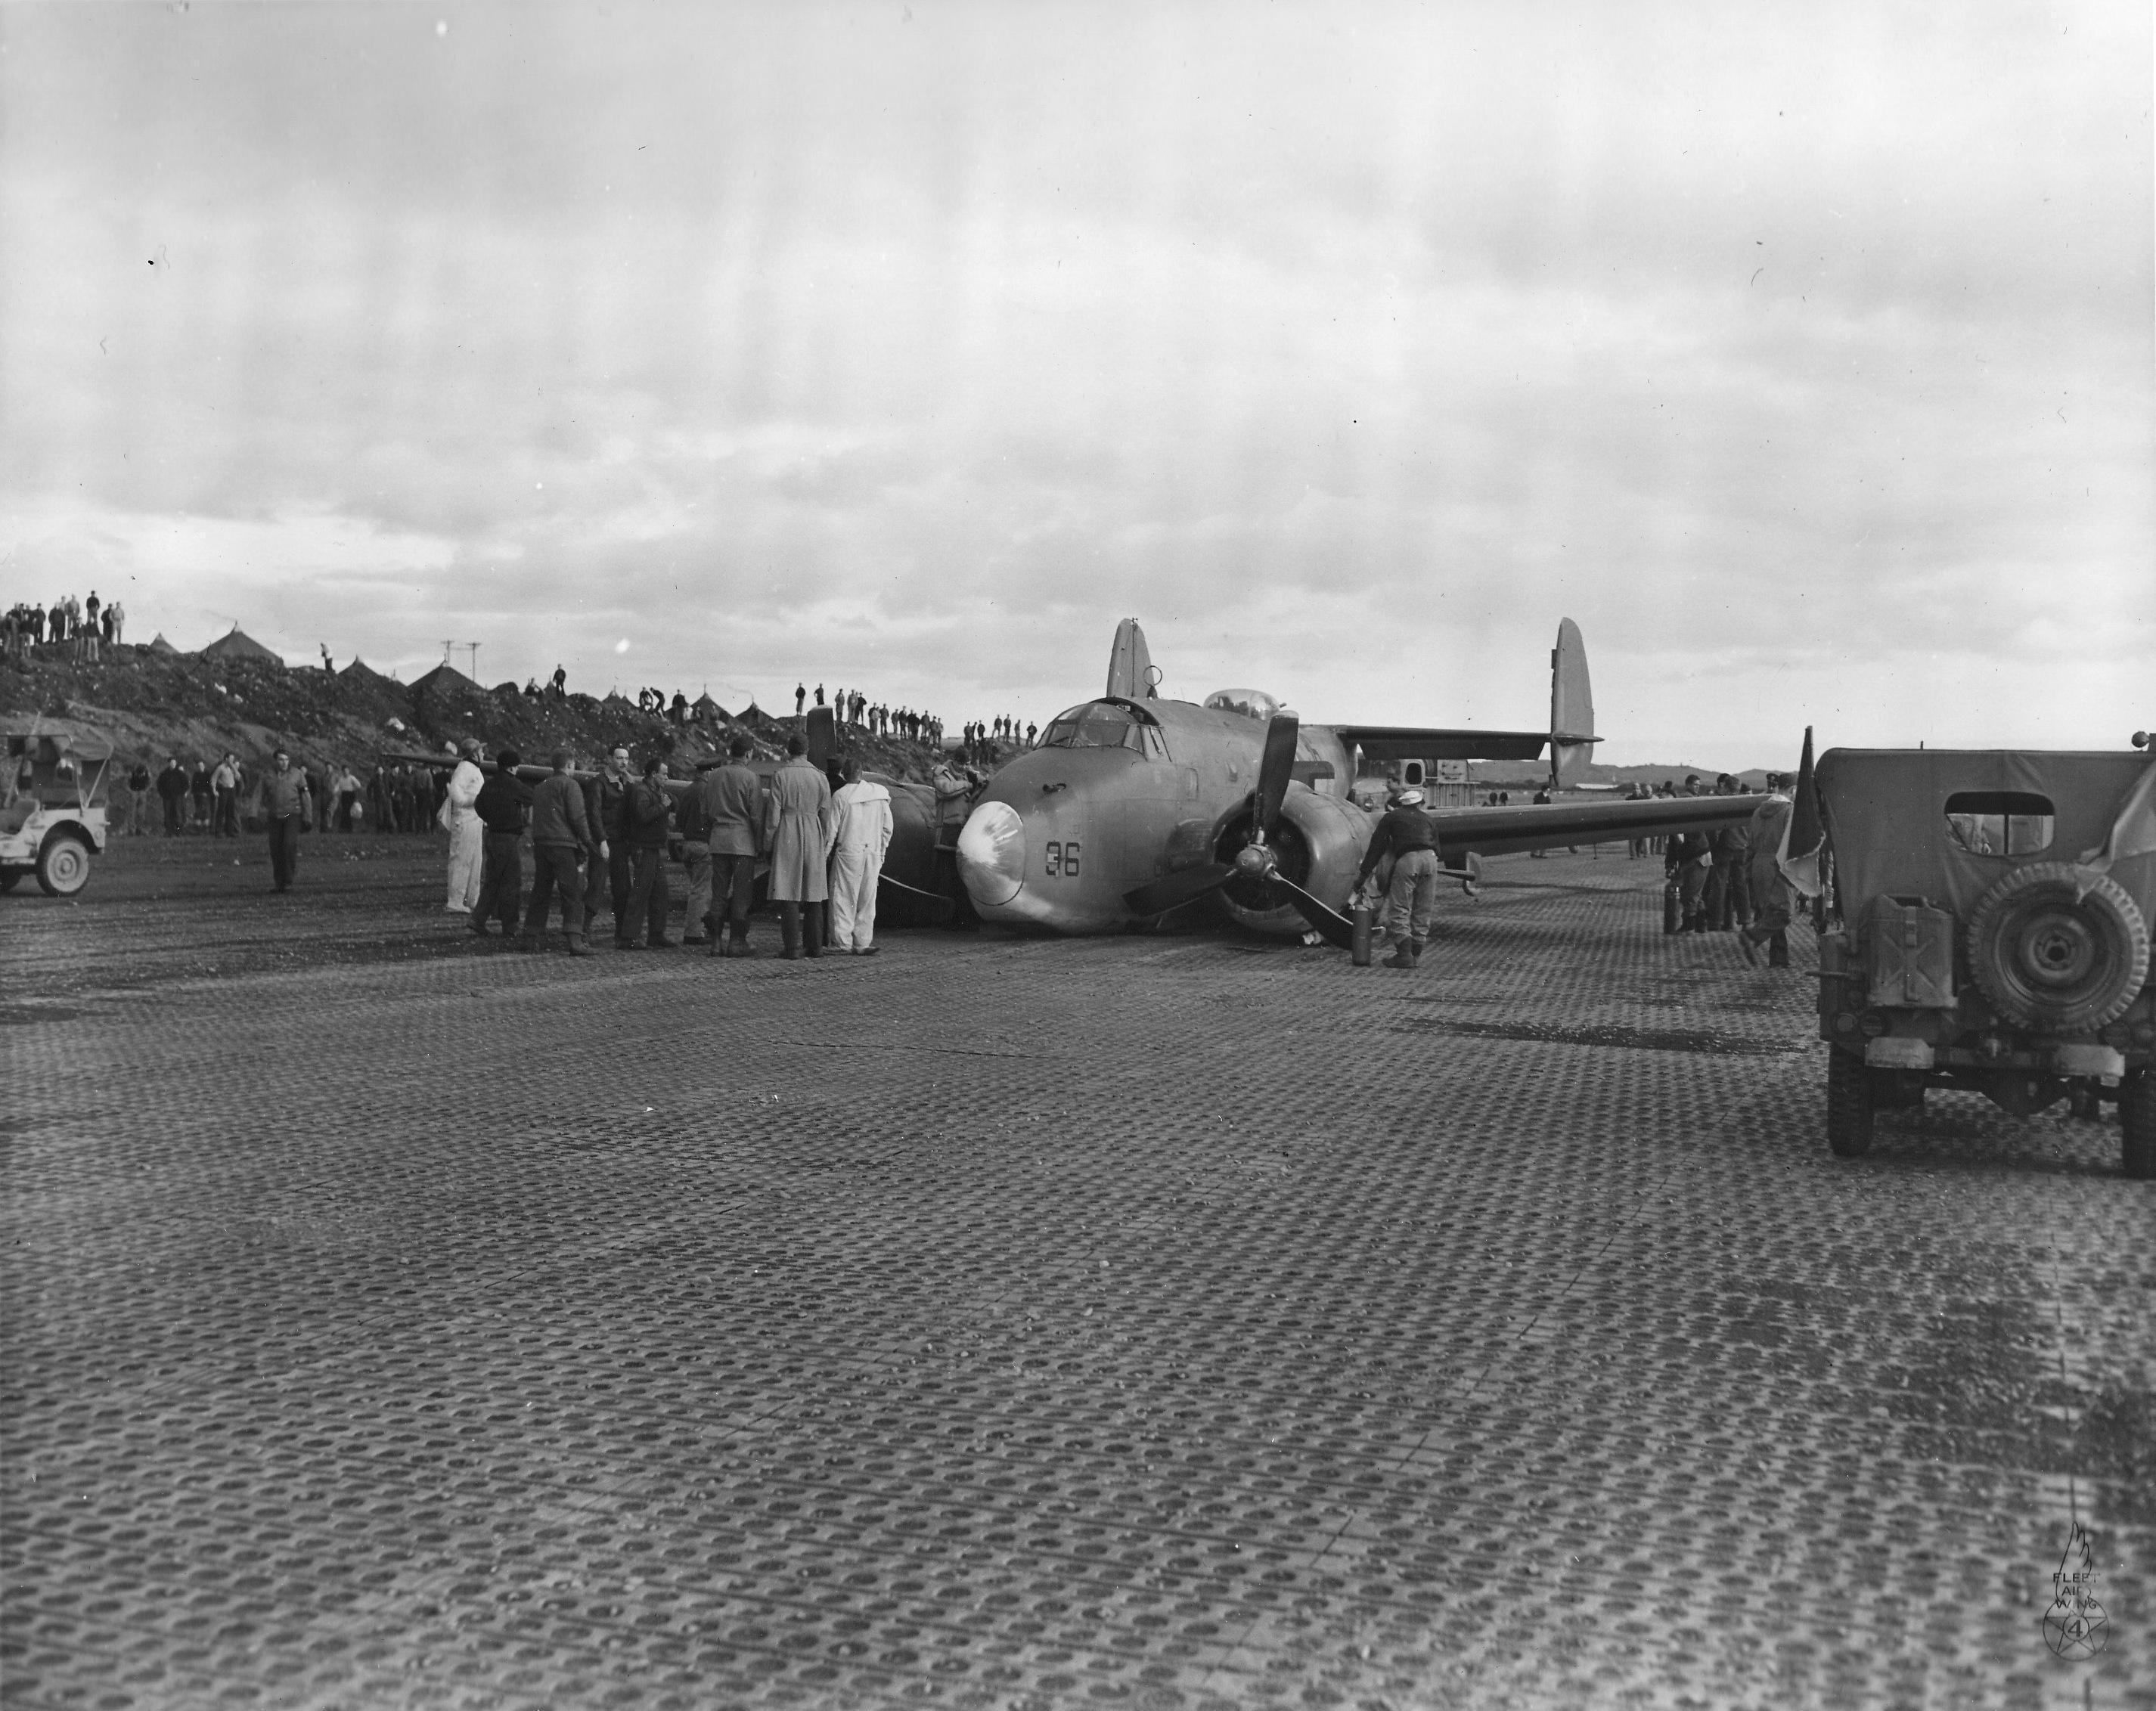 A PV-1 Ventura of Bombing Squadron VB-139 after a belly landing on Attu Island, Alaska, 18 May 1944. This aircraft’s hydraulics were shot out by a Japanese gunboat off the Kamchatka Peninsula. Photo 1 of 2